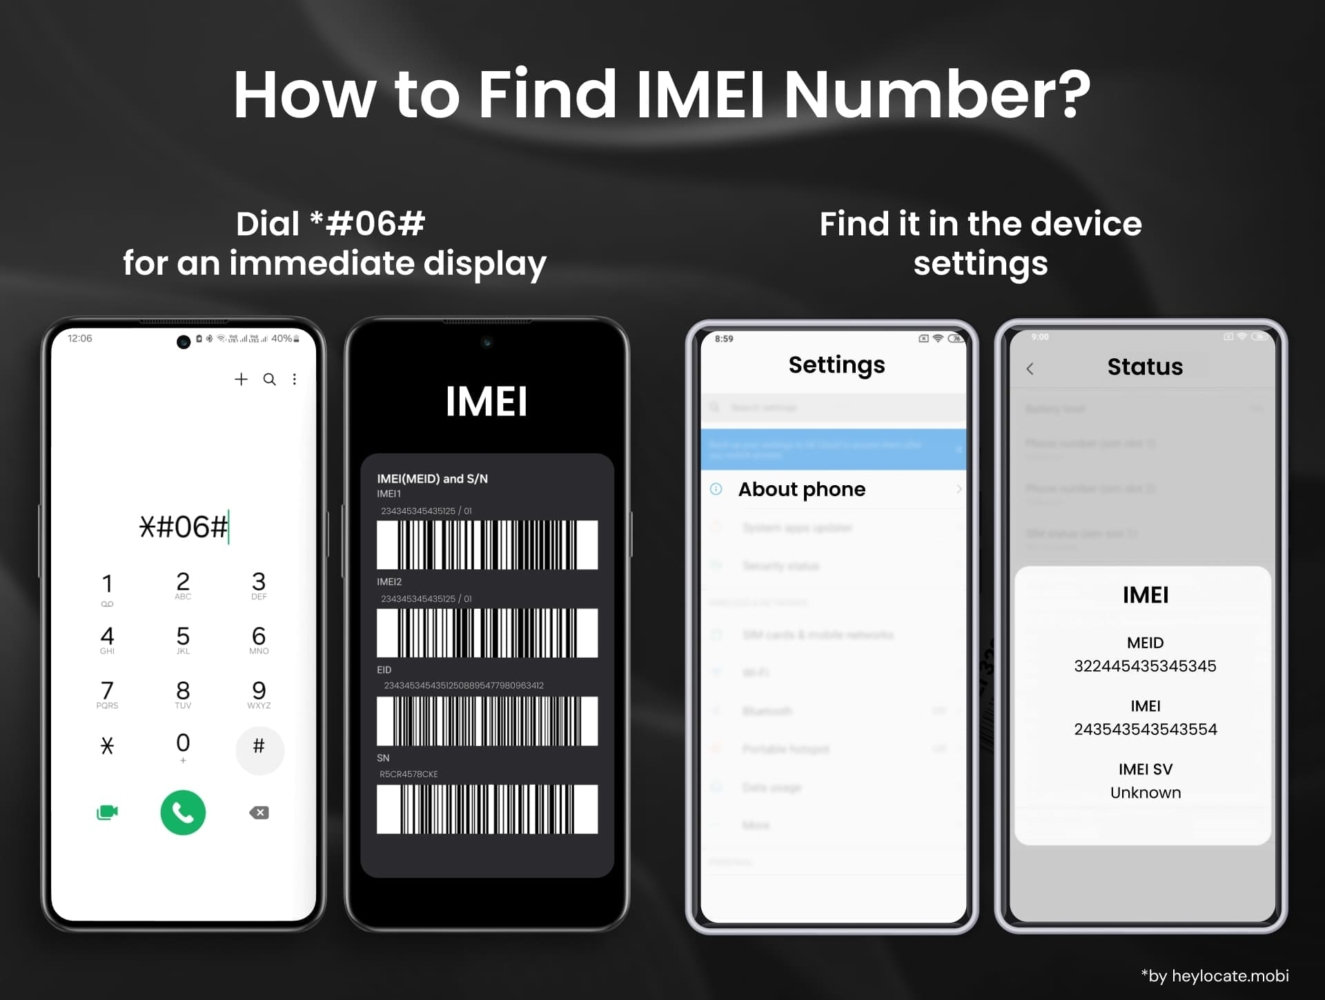 A graphical guide on how to find an IMEI number on a mobile phone. Includes three methods: dialing *#06#, checking the IMEI in the phone's settings under 'About phone', and viewing it in the 'Status' section